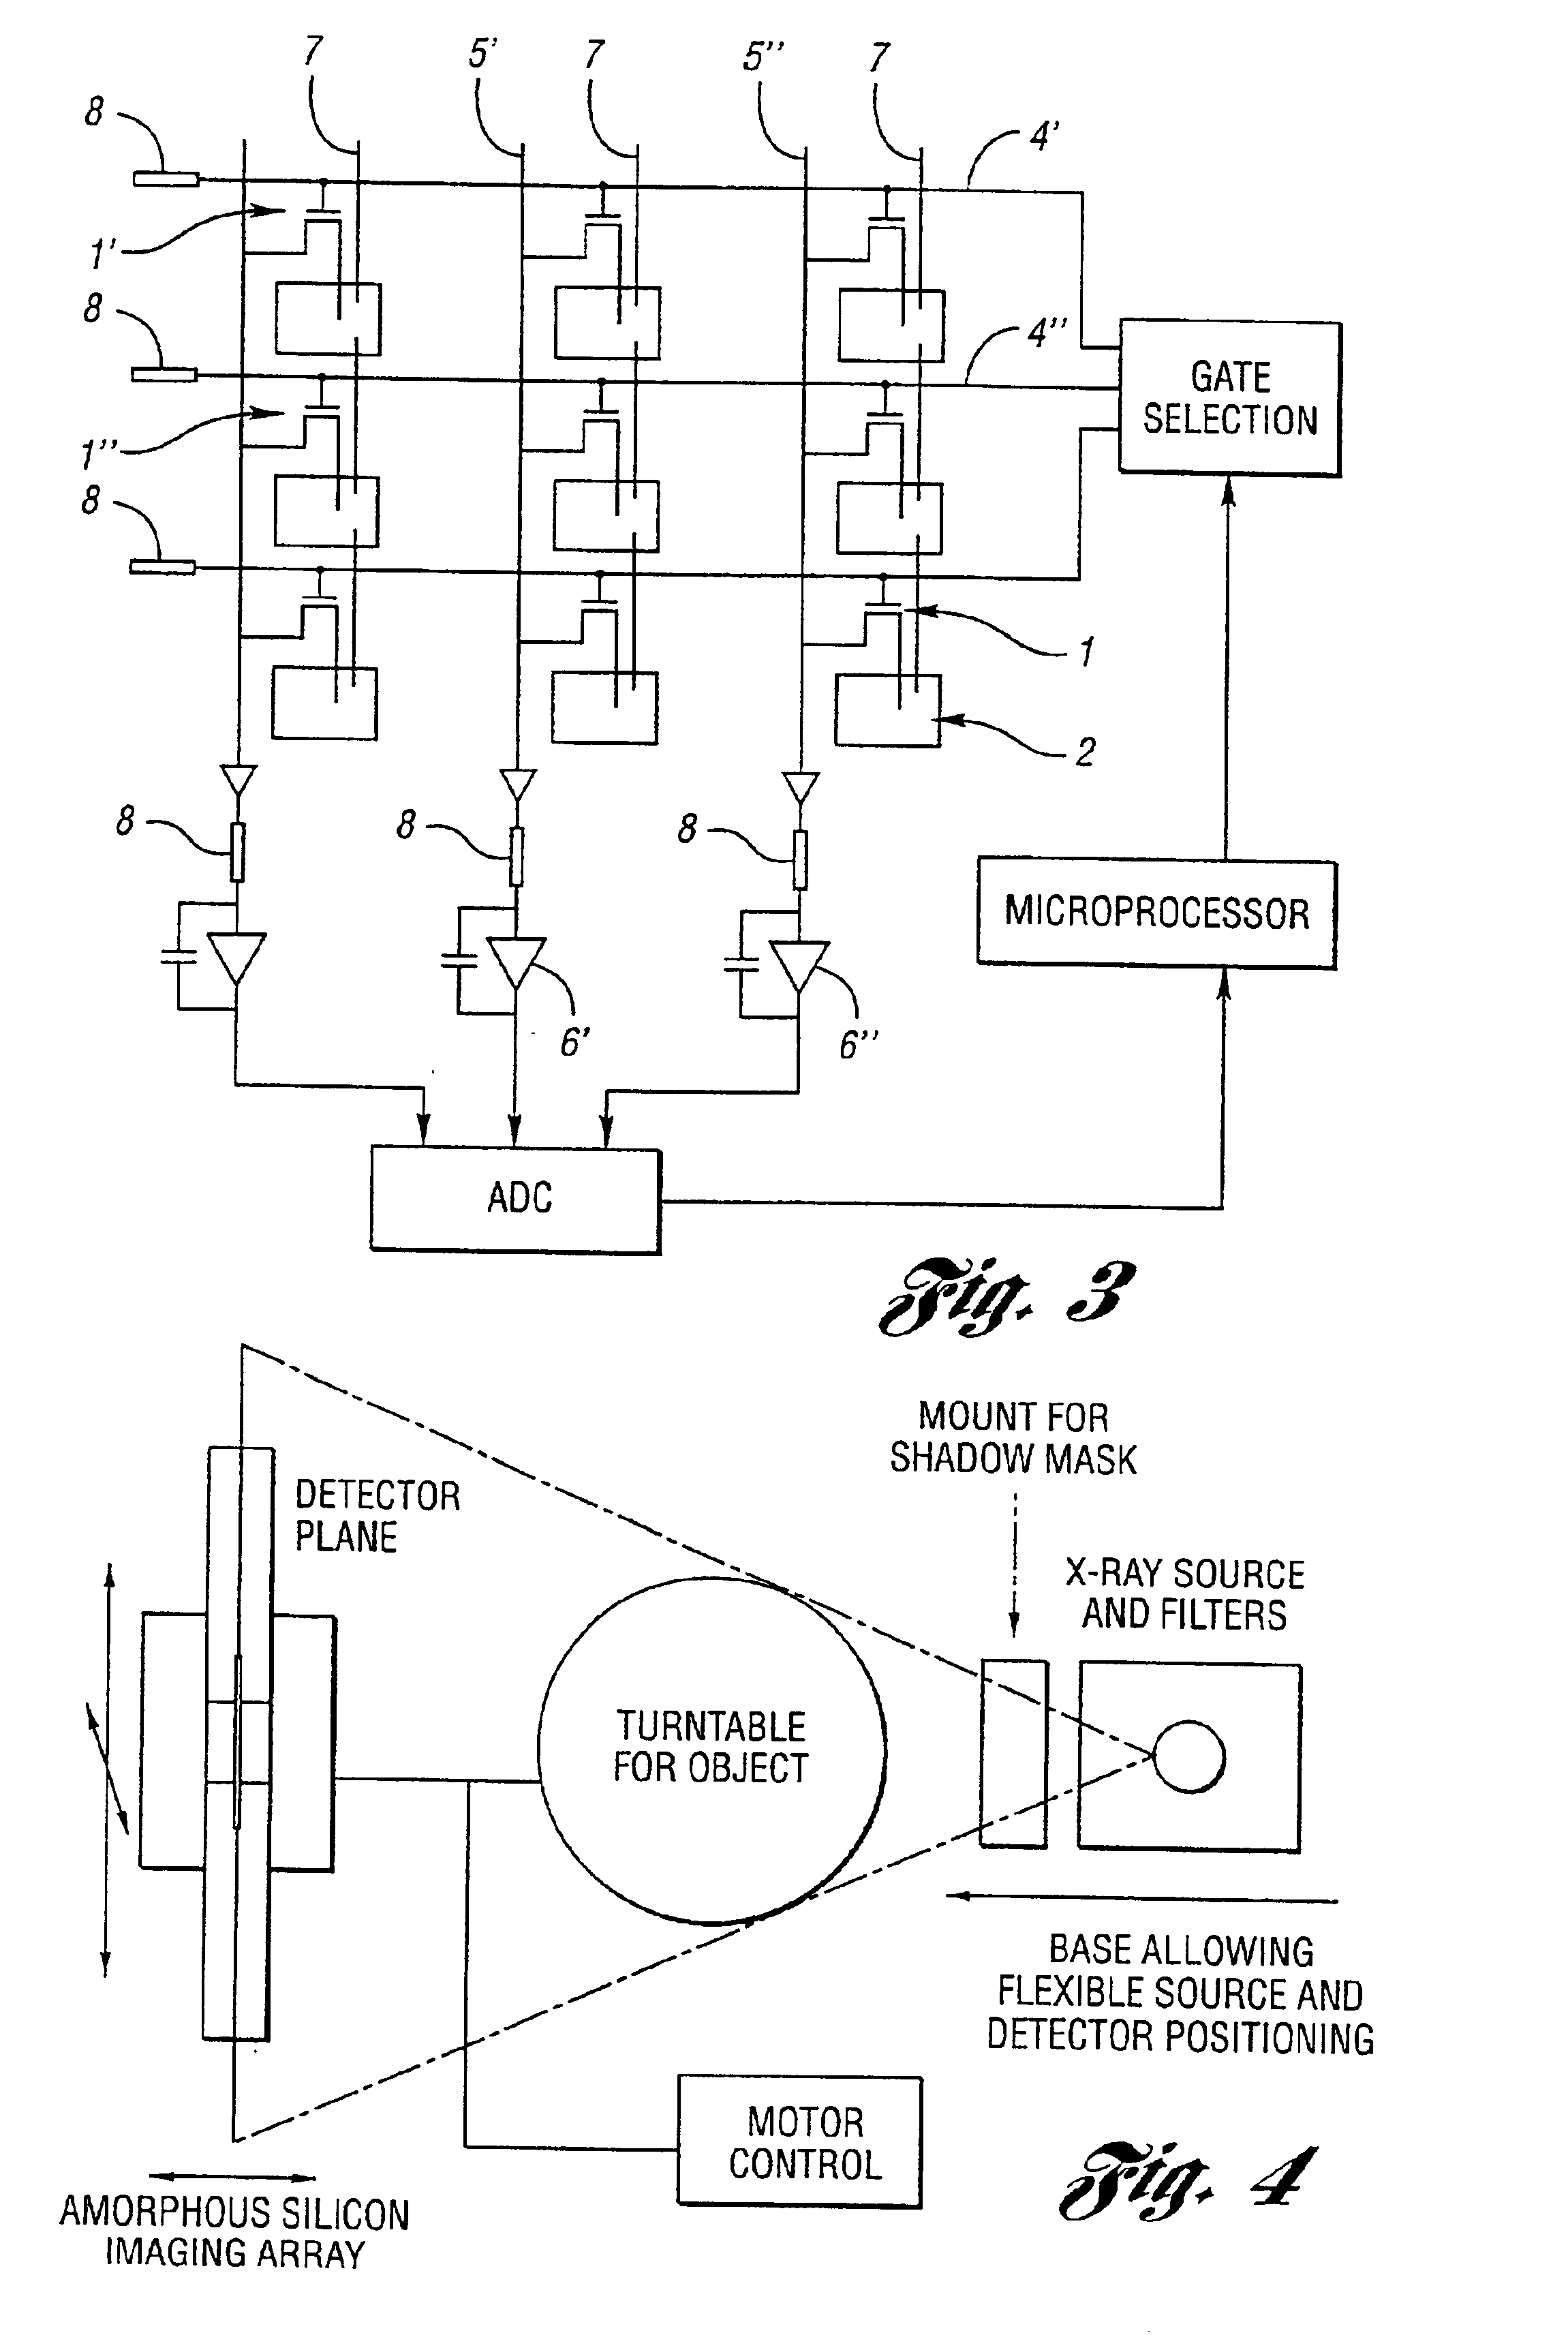 Method, processor and computed tomography (CT) machine for generating images utilizing high and low sensitivity data collected from a flat panel detector having an extended dynamic range